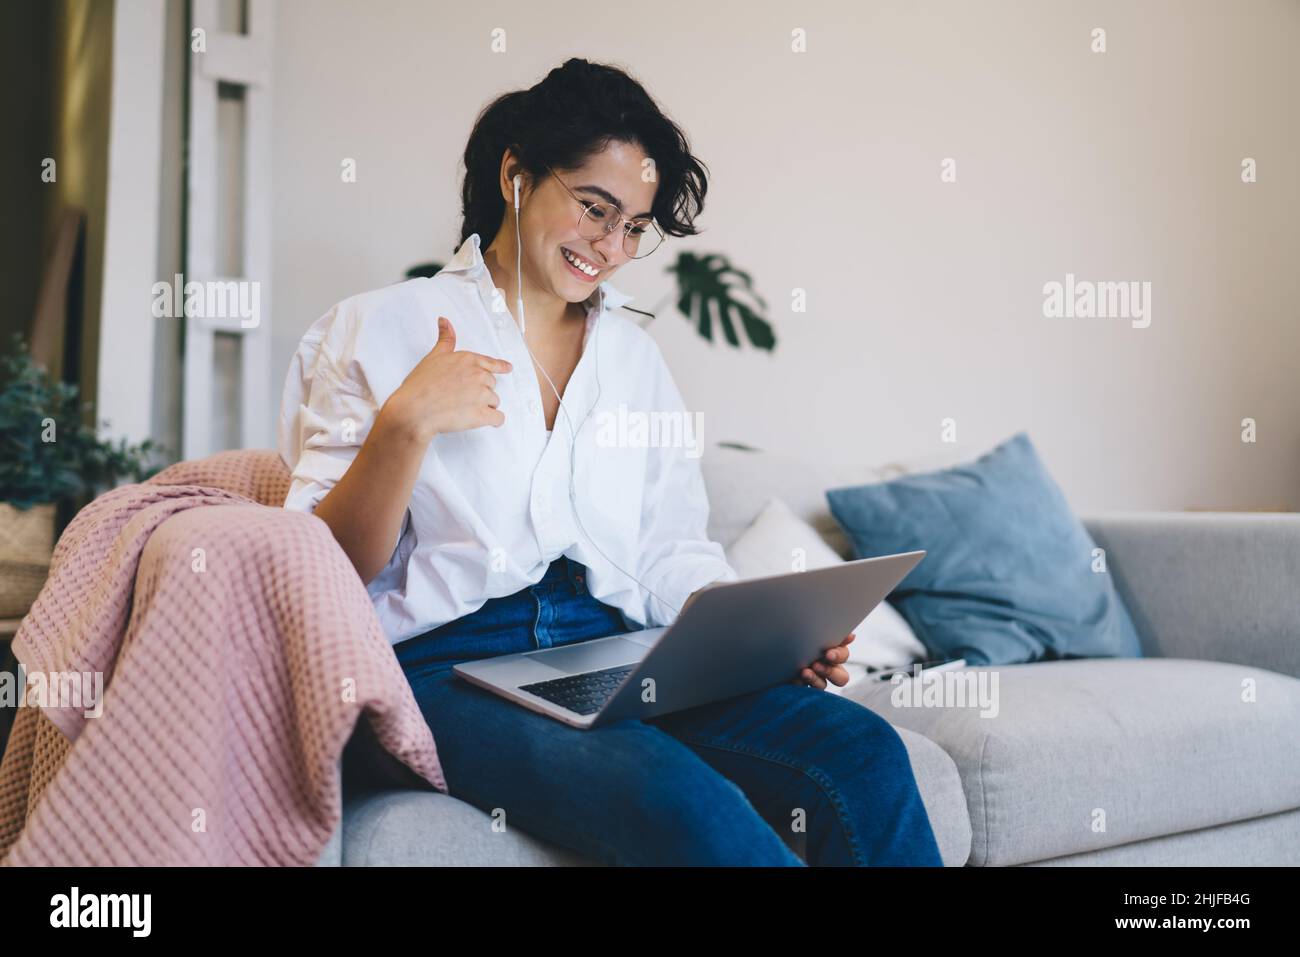 Happy woman having video chat via laptop at home Stock Photo